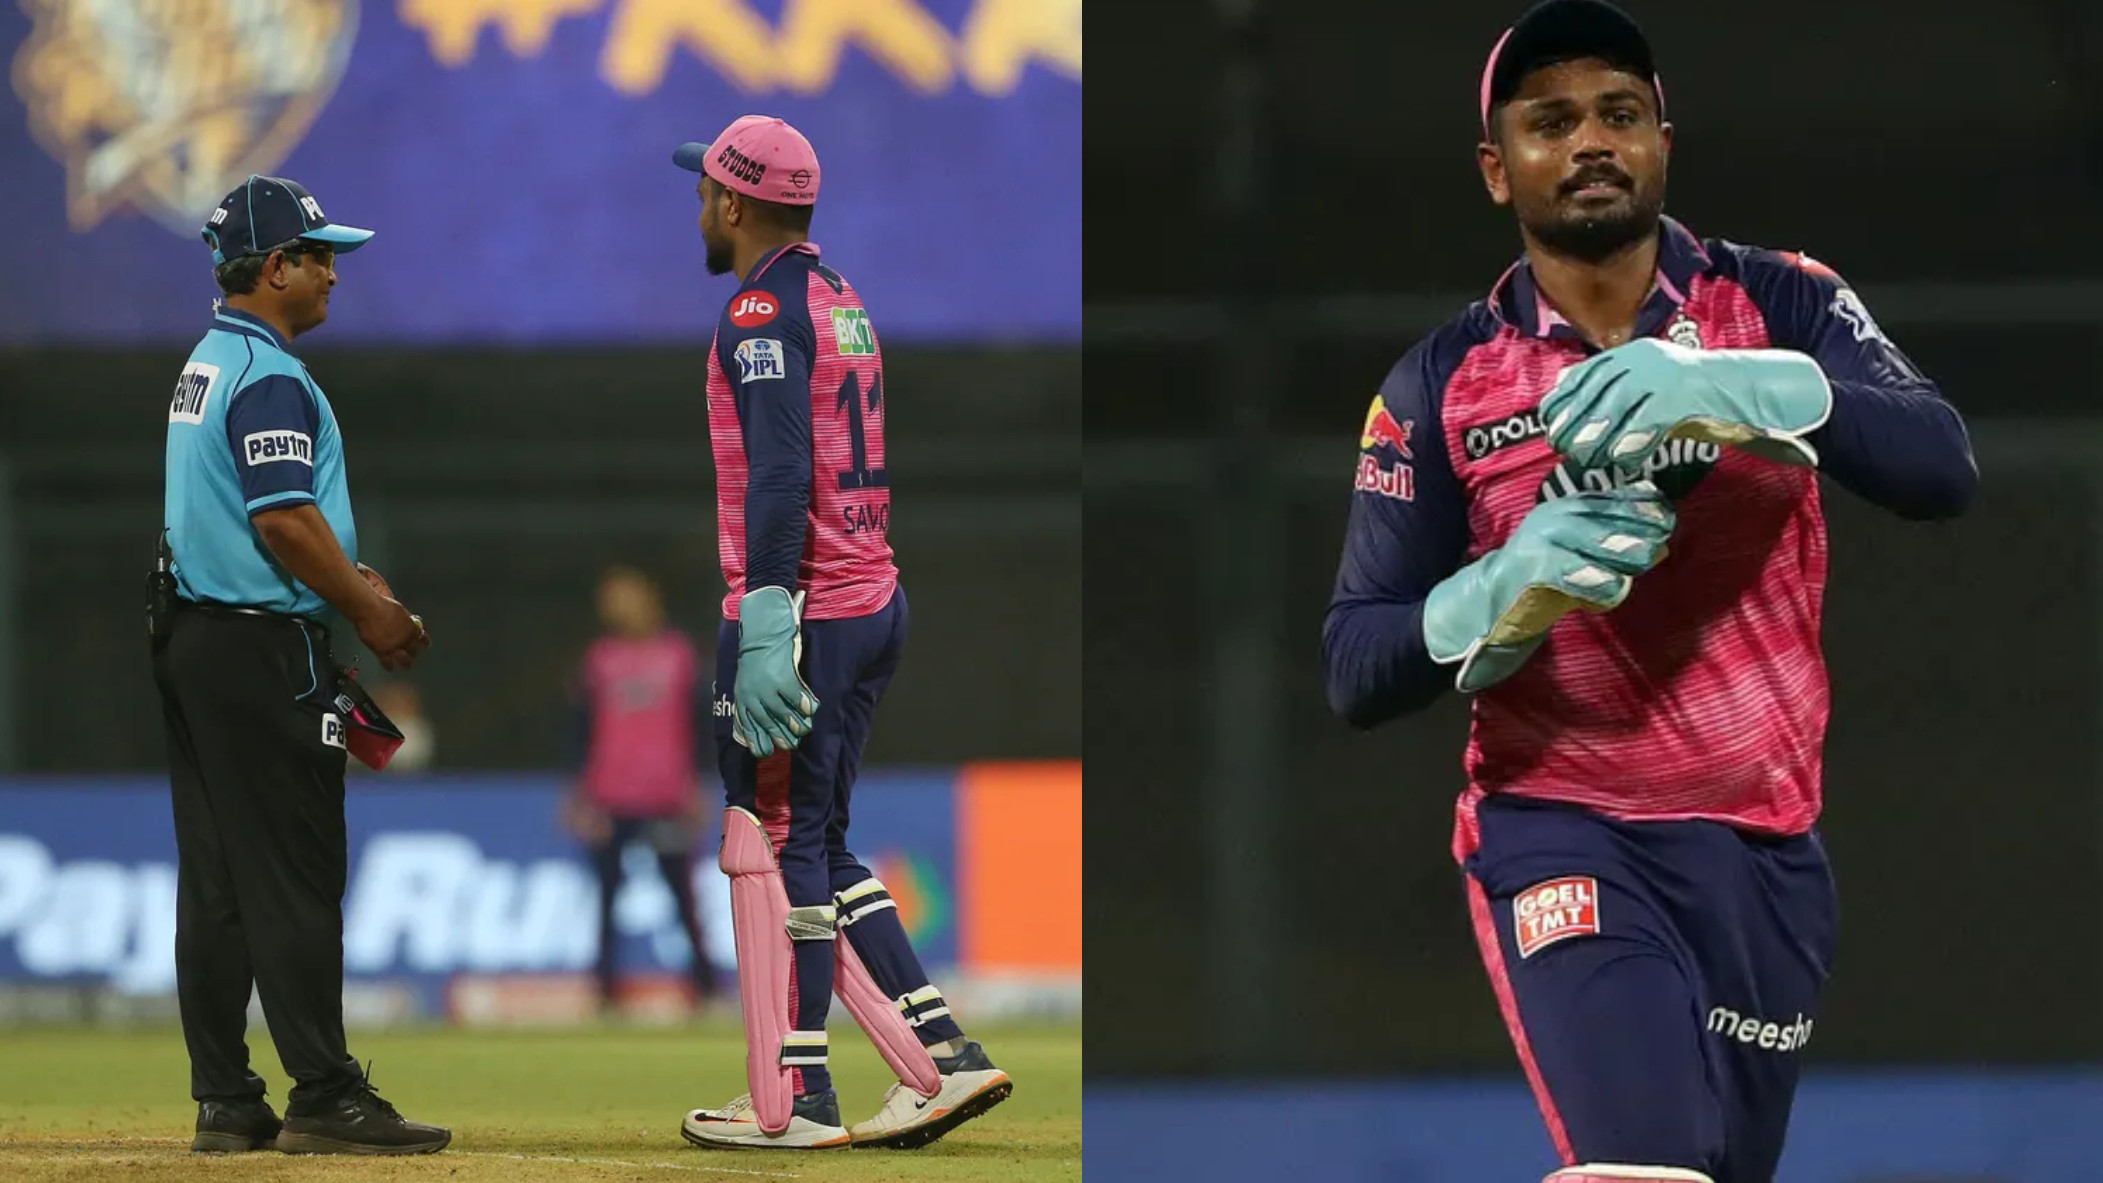 IPL 2022: Sanju Samson wasted DRS like his international career- Twitter reacts to RR captain checking wide ball using DRS